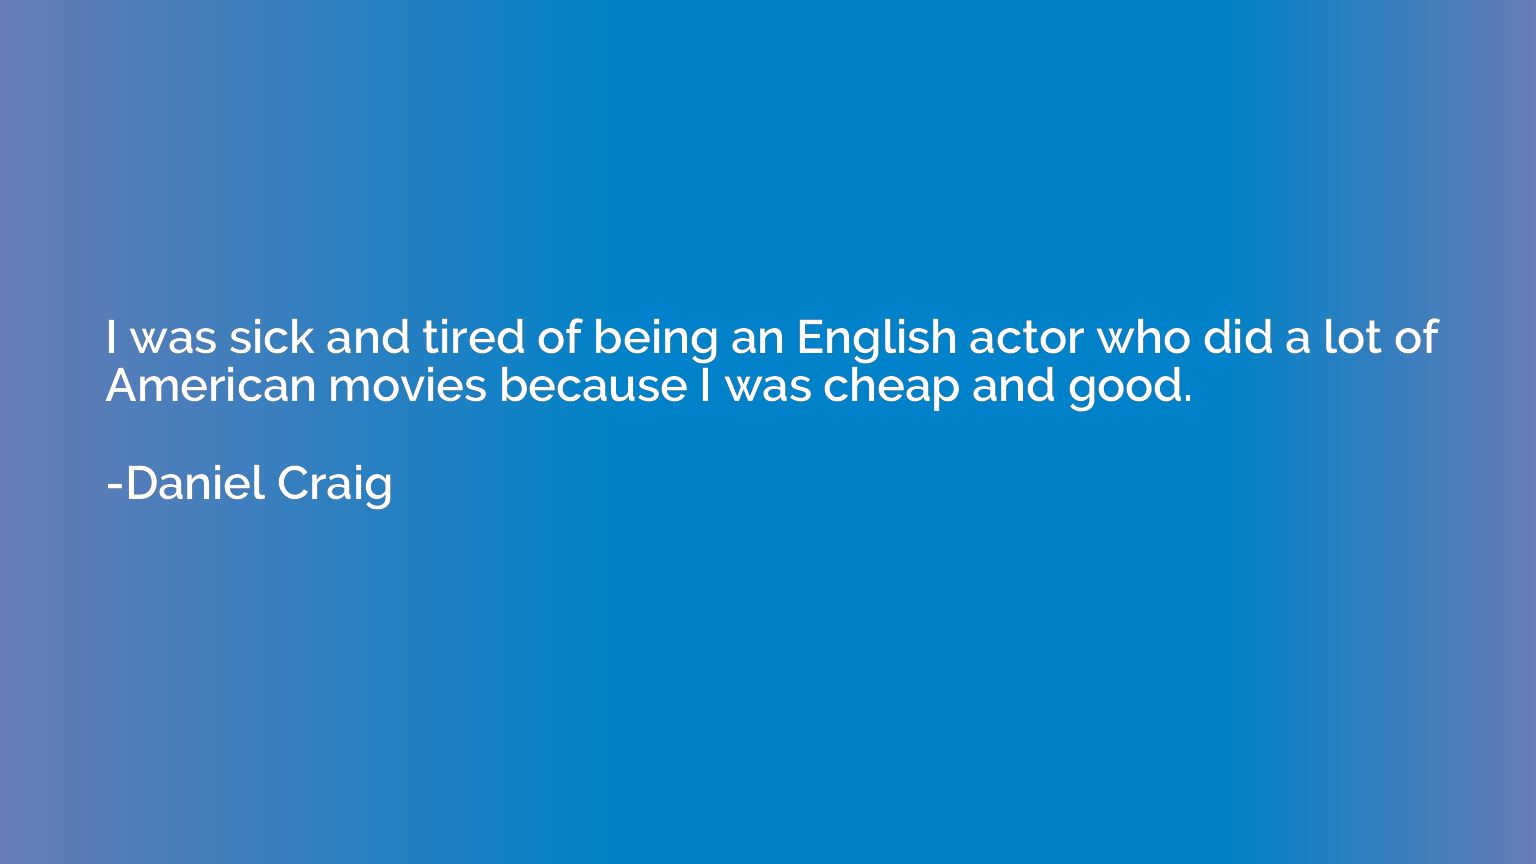 I was sick and tired of being an English actor who did a lot